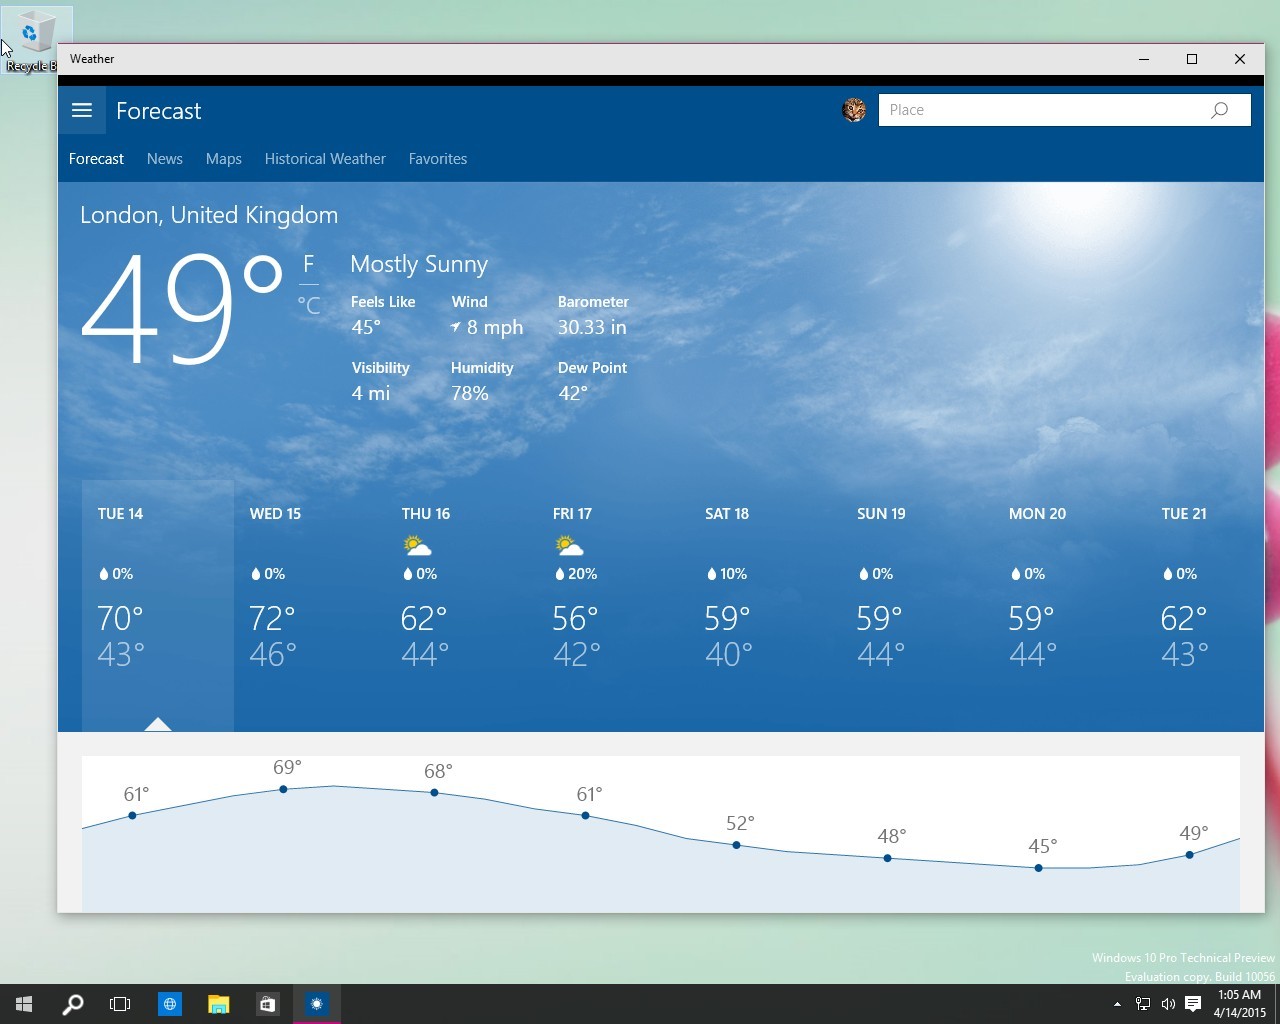 Microsoft Releases New Weather App for Windows 10 with Hamburger Button.